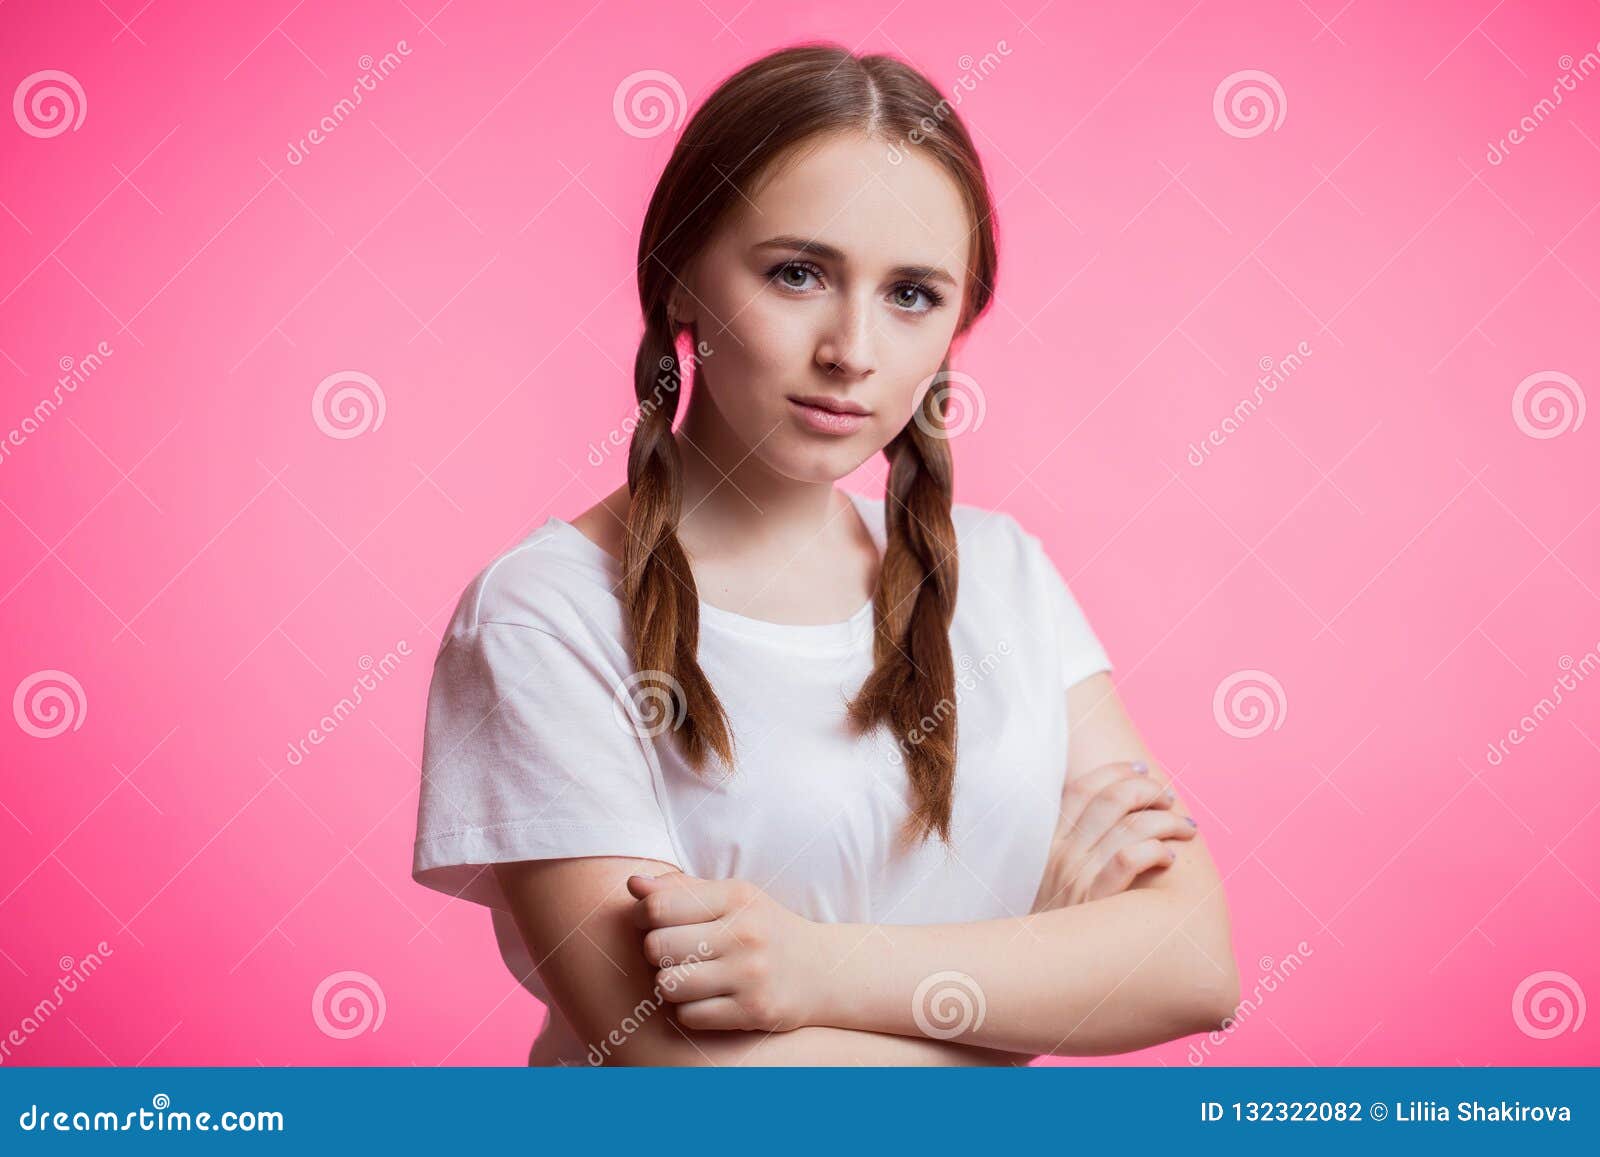 Young Teen With Pony Tails